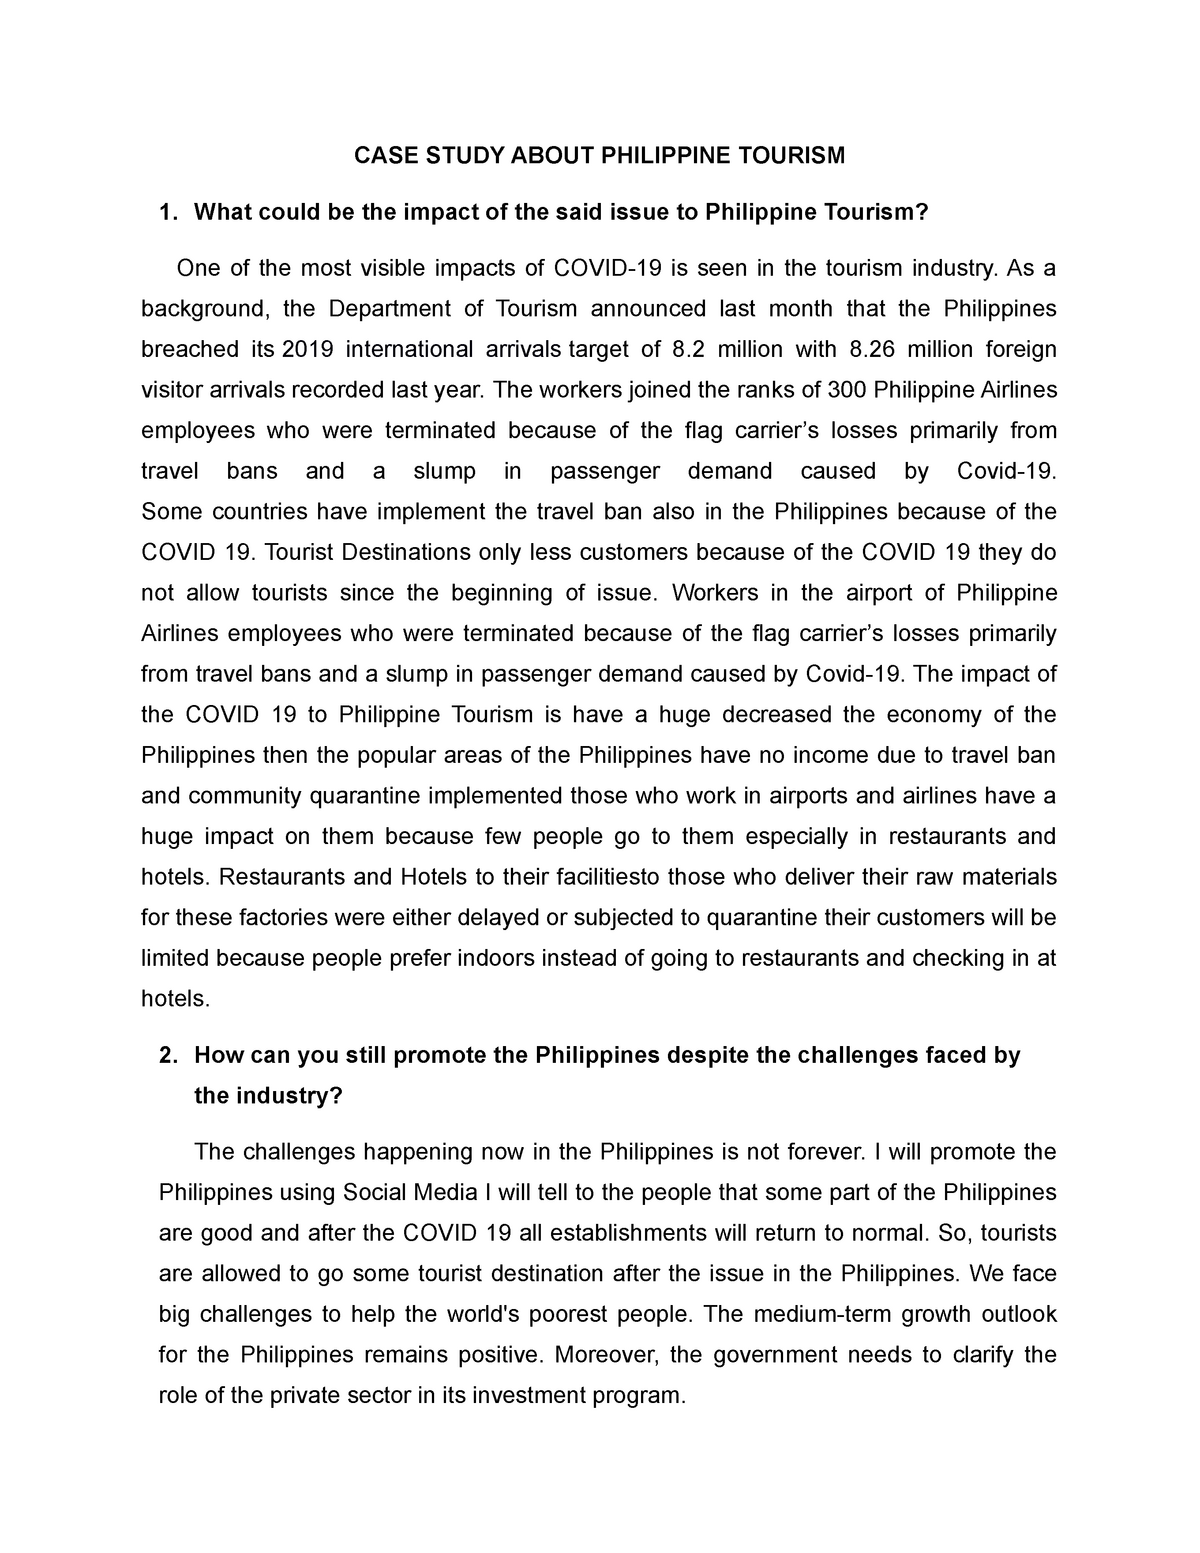 short case study in the philippines